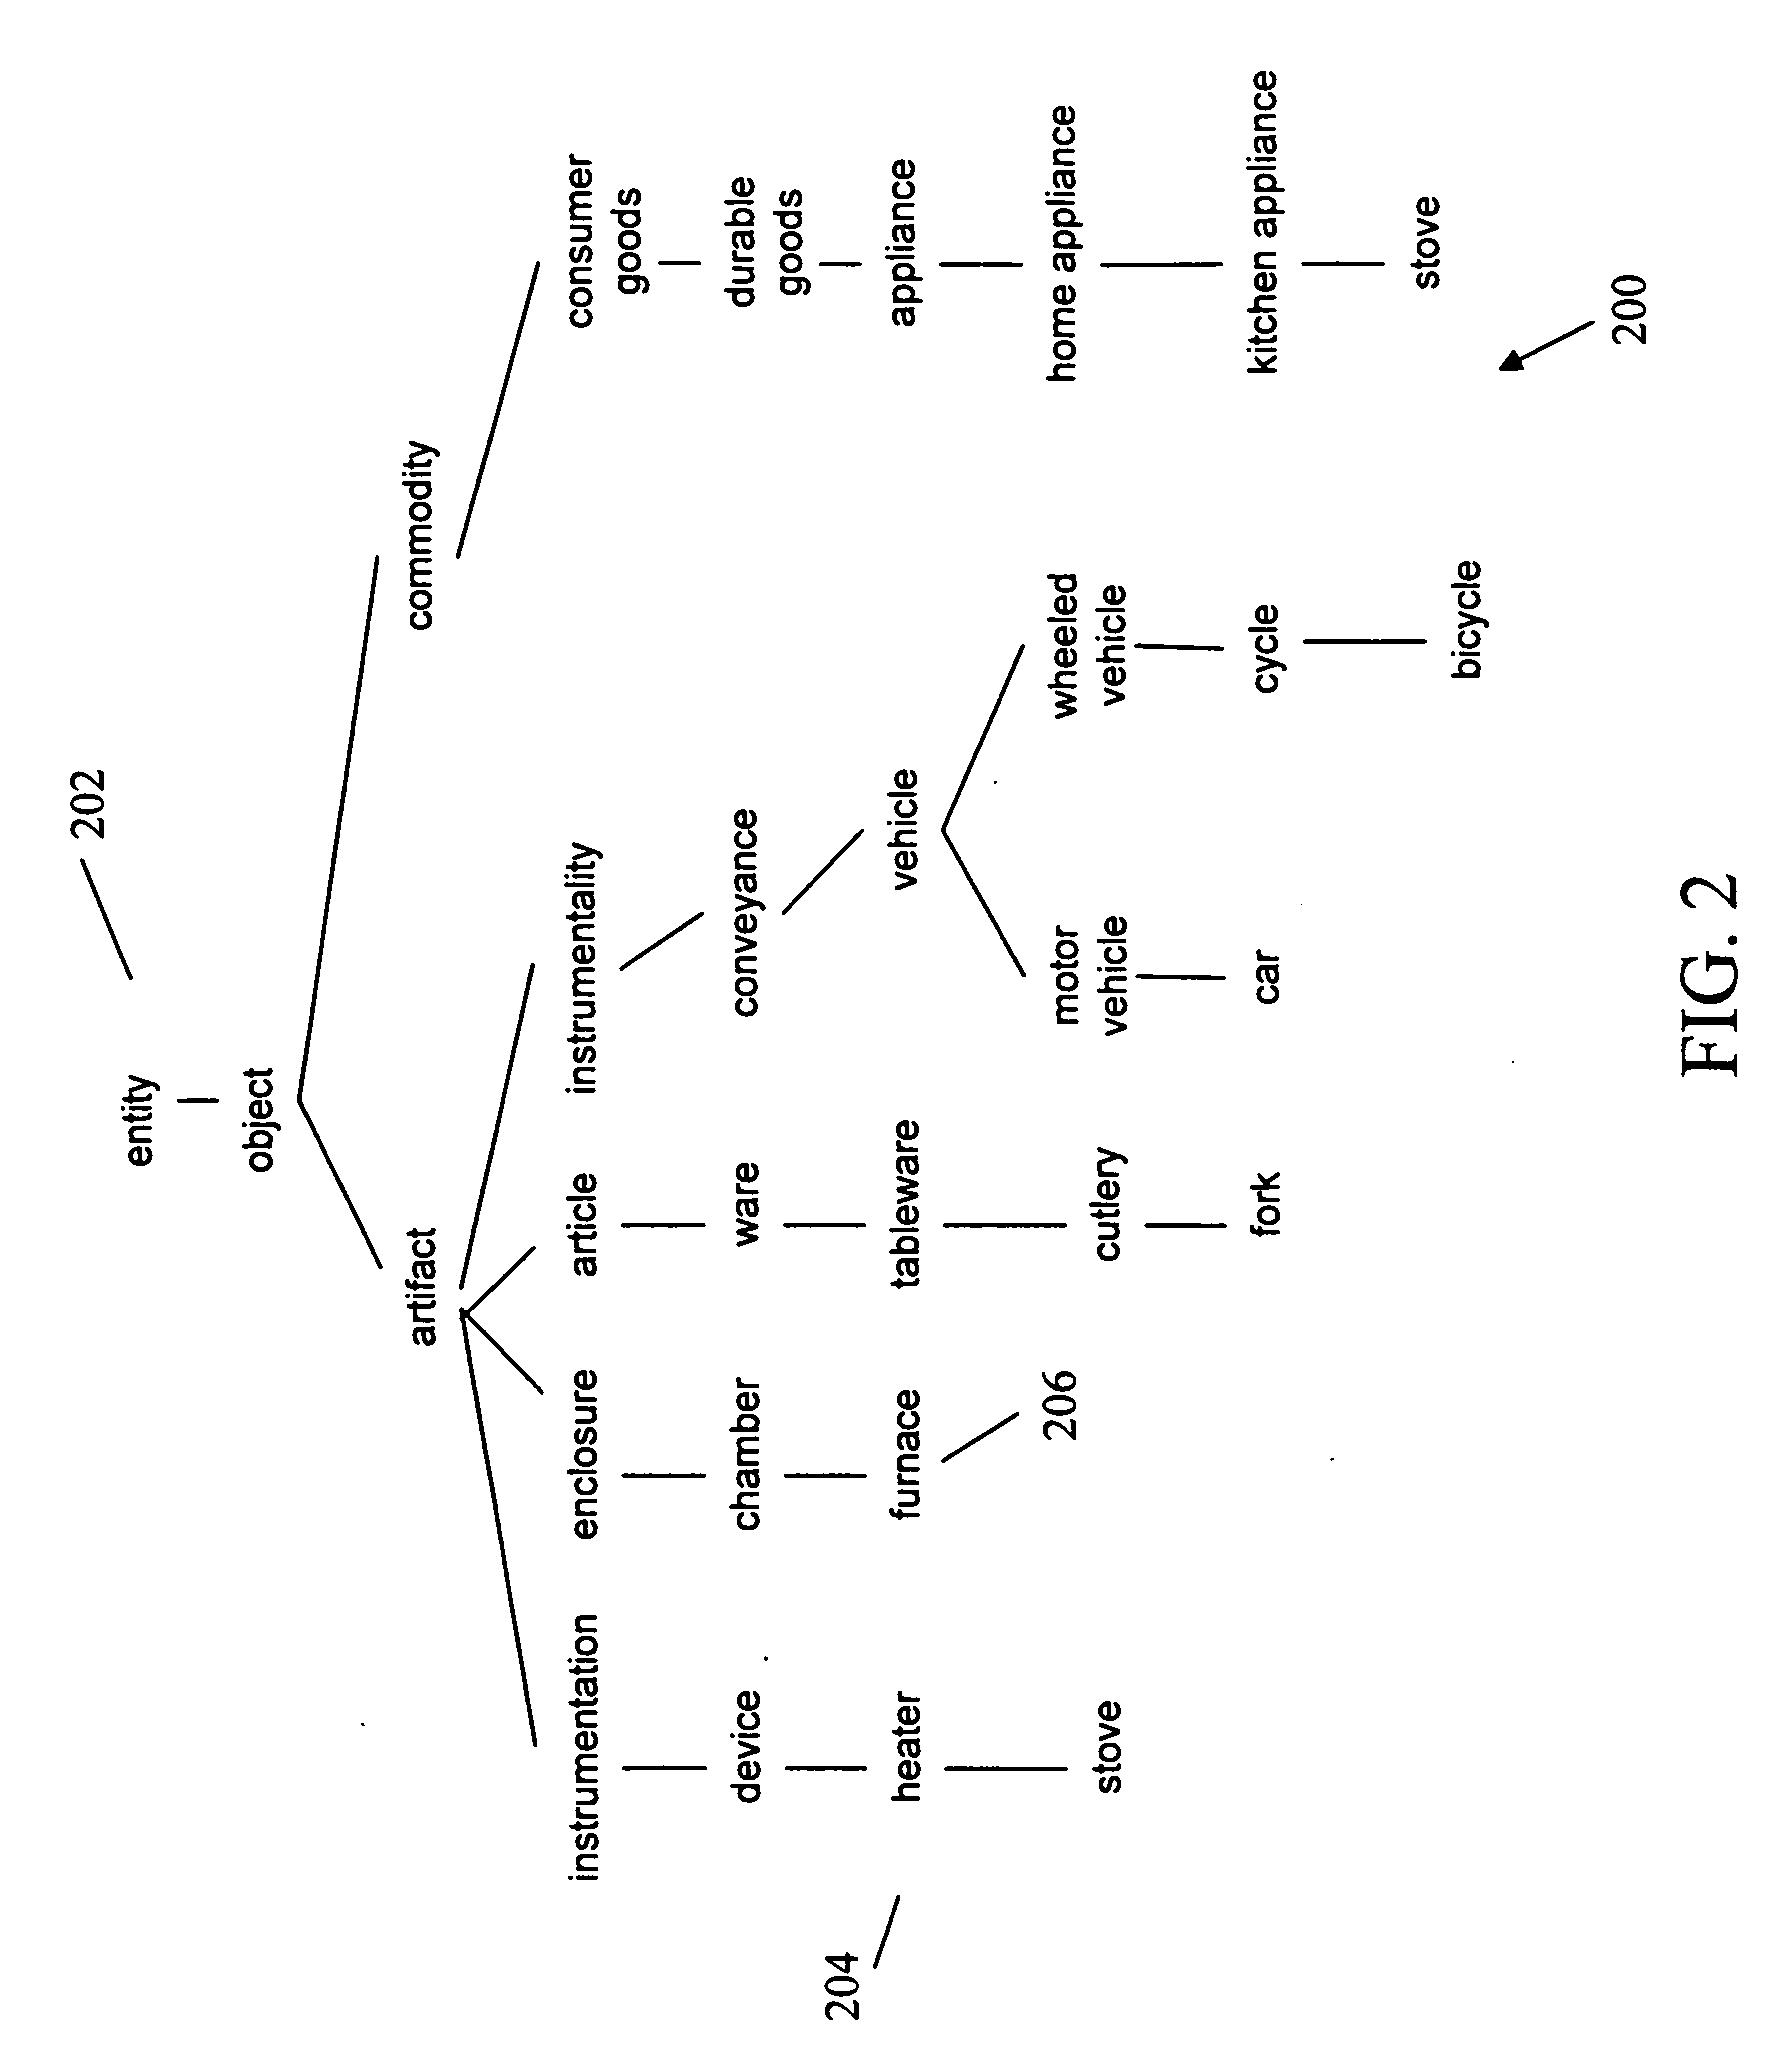 Method for semantic based storage and retrieval of information